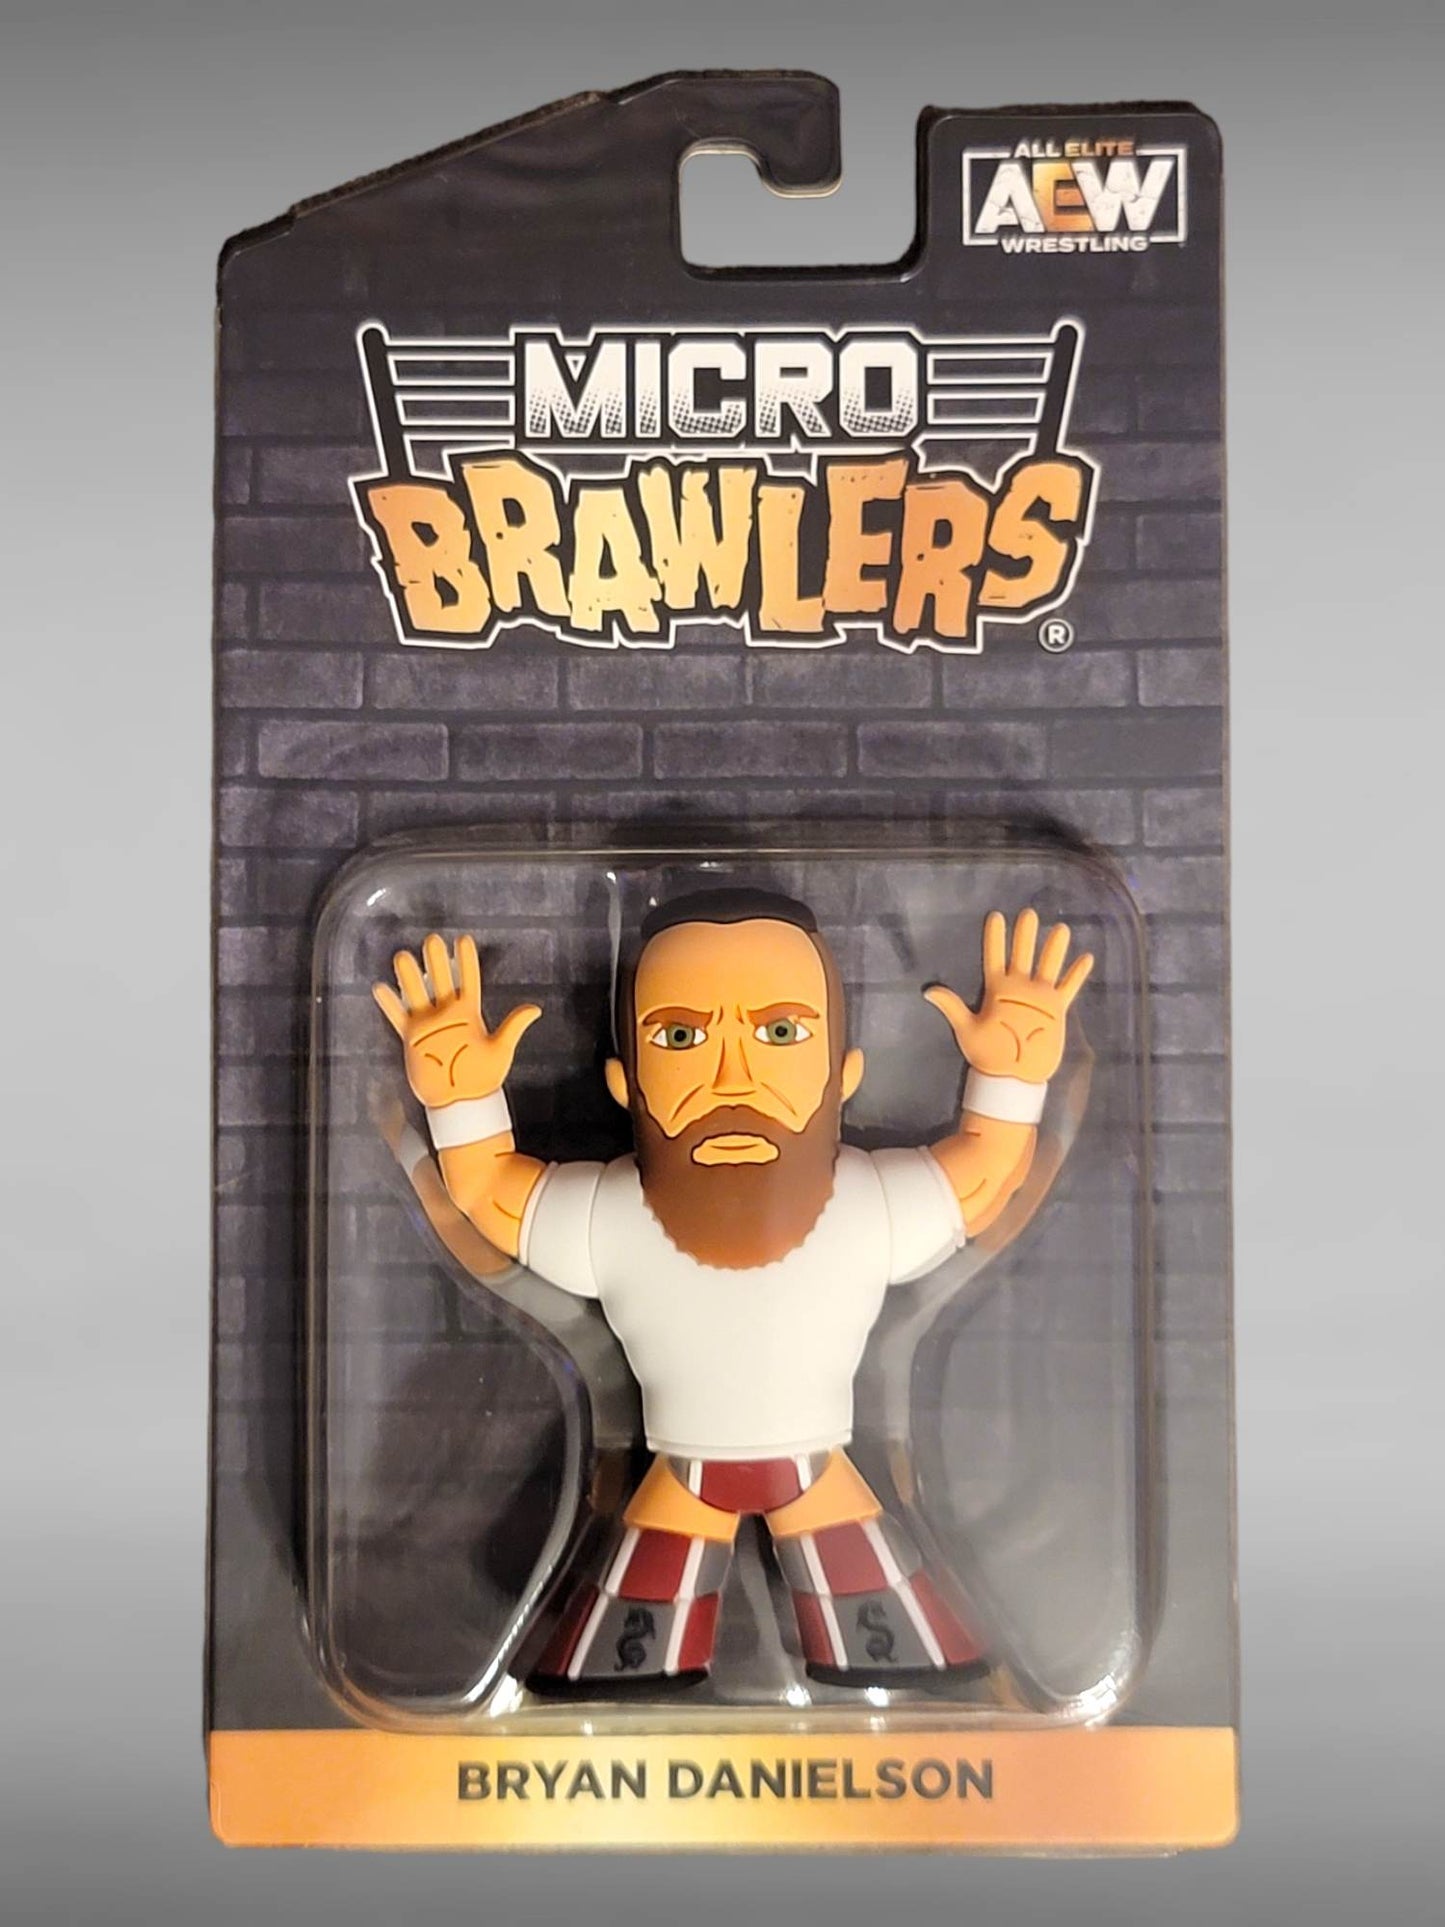 My AEW/ROH micro brawler collection! I will be adding to it very soon.